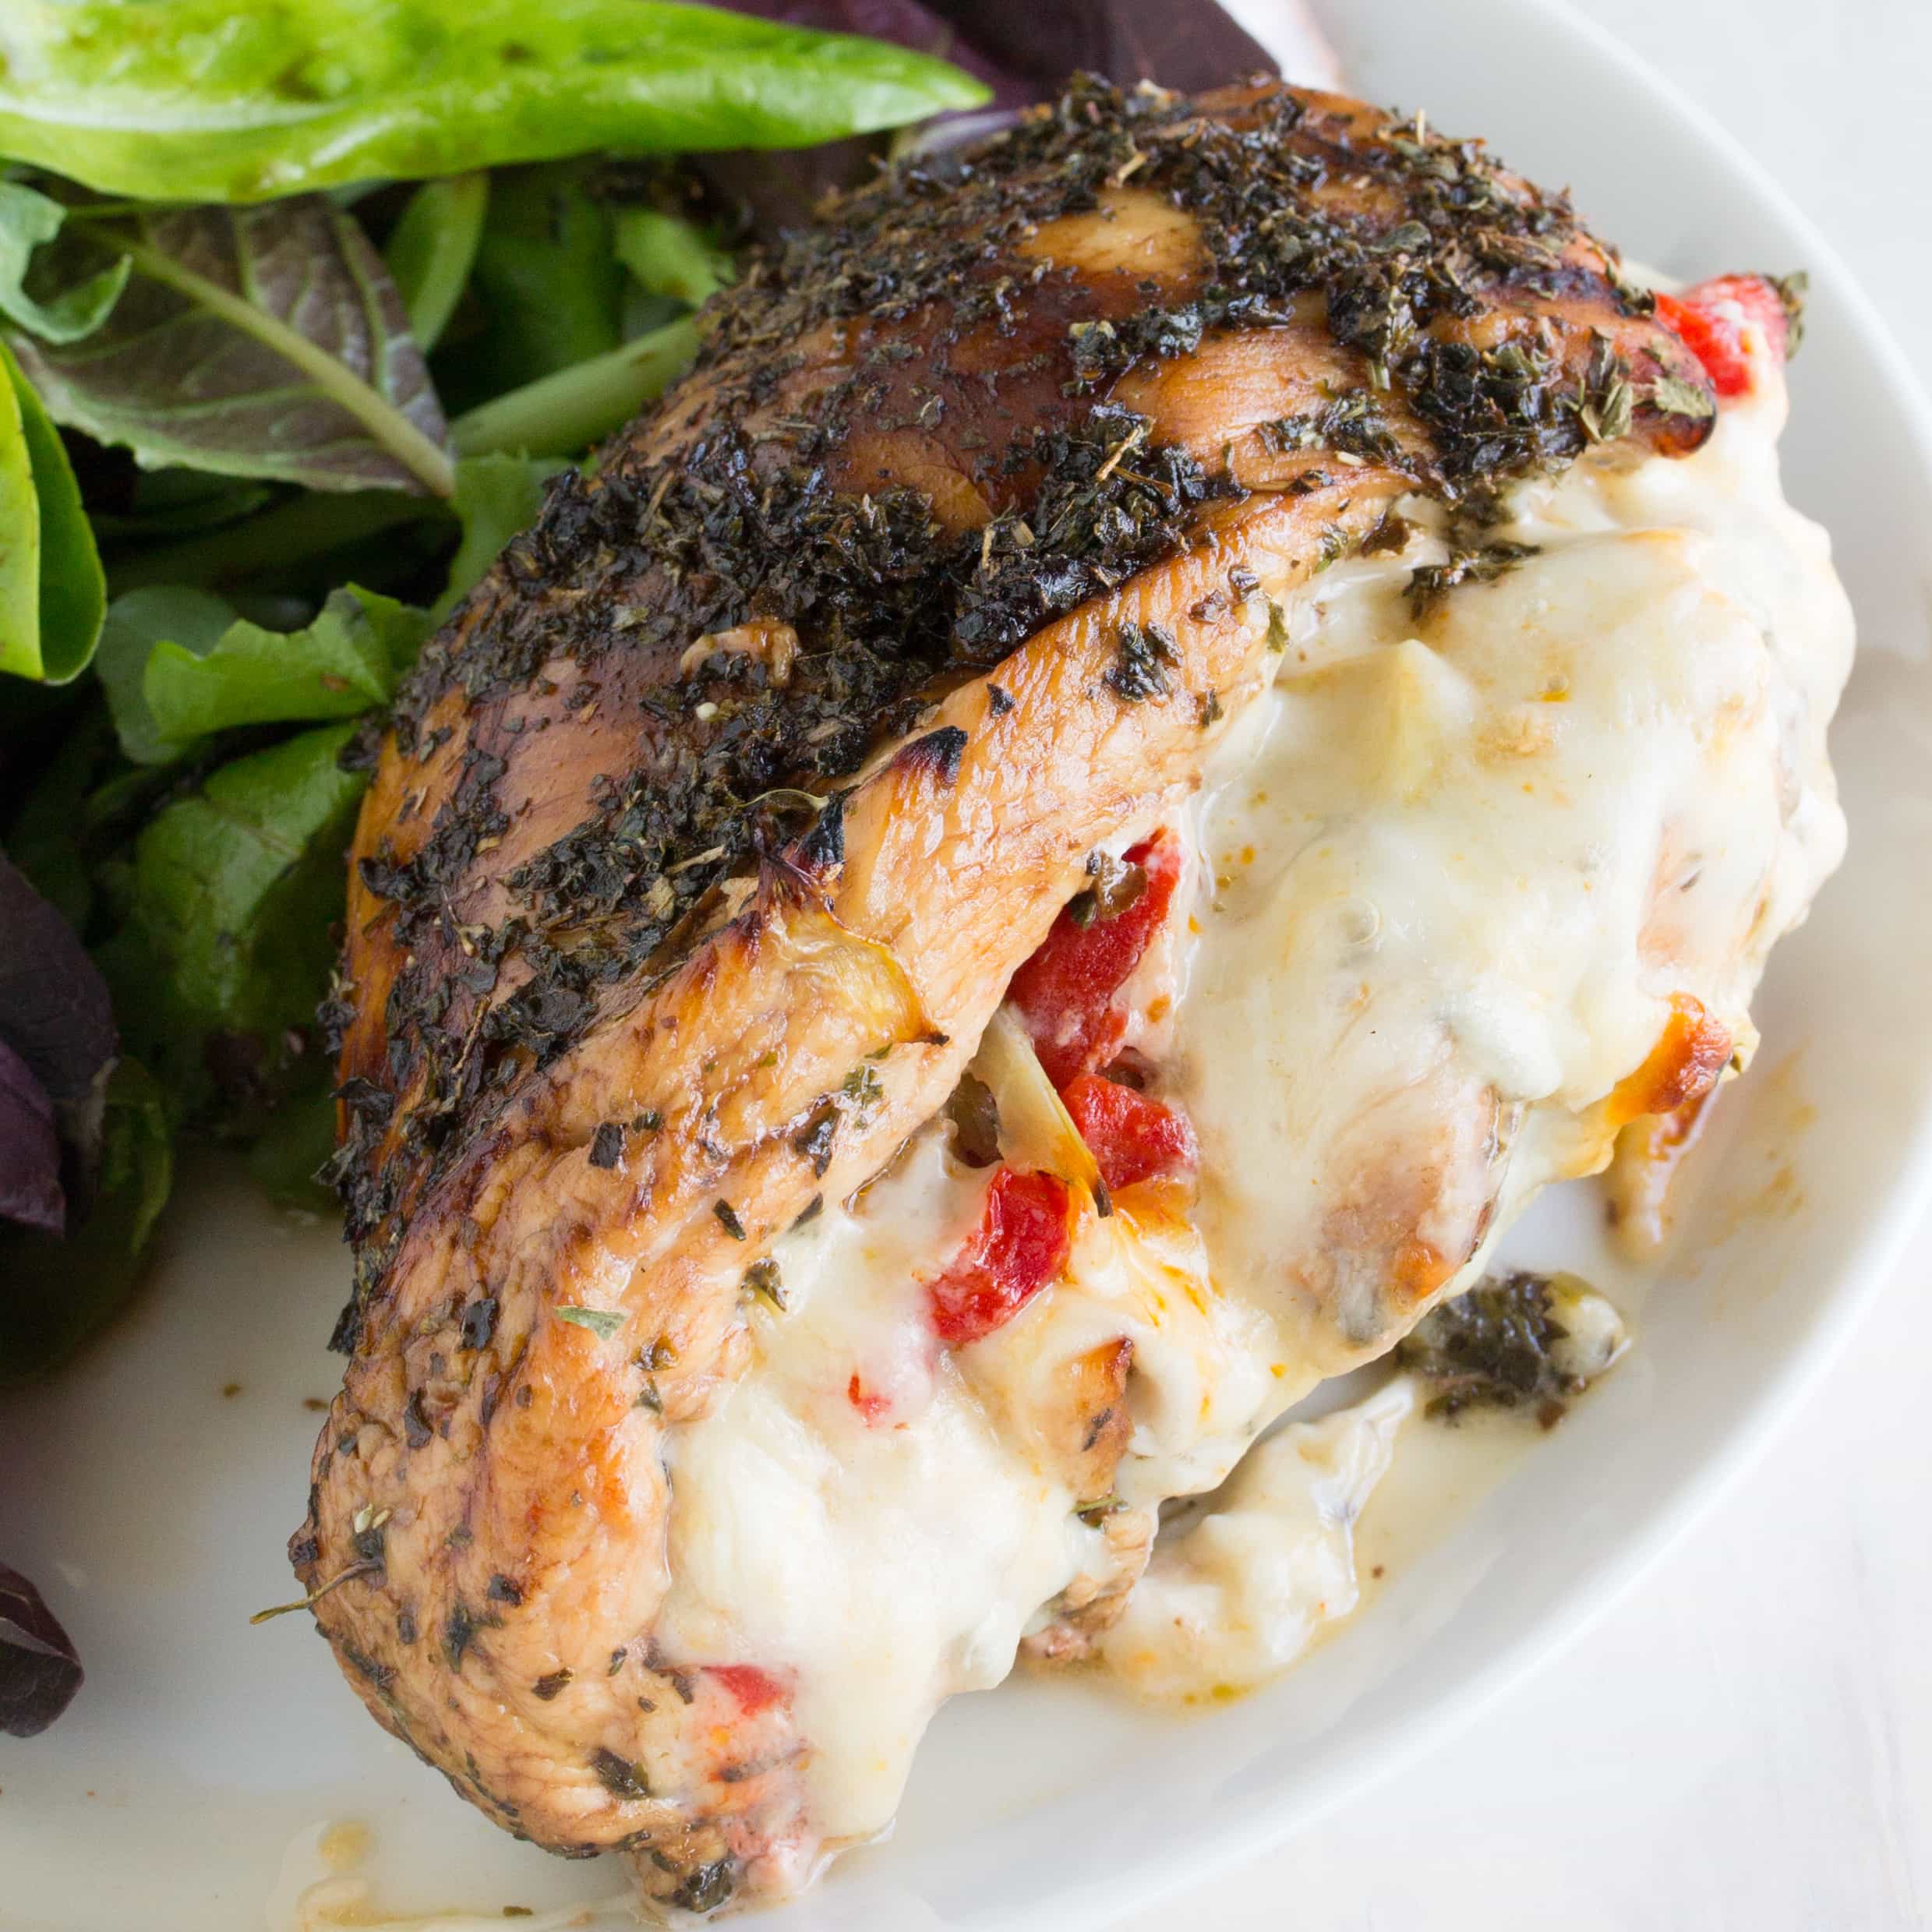 Italian Stuffed Chicken: Balsamic and herb glazed chicken, stuffed with artichoke, bell pepper, and fennel and oozing with melted mozzarella, served with a salad on a plate.